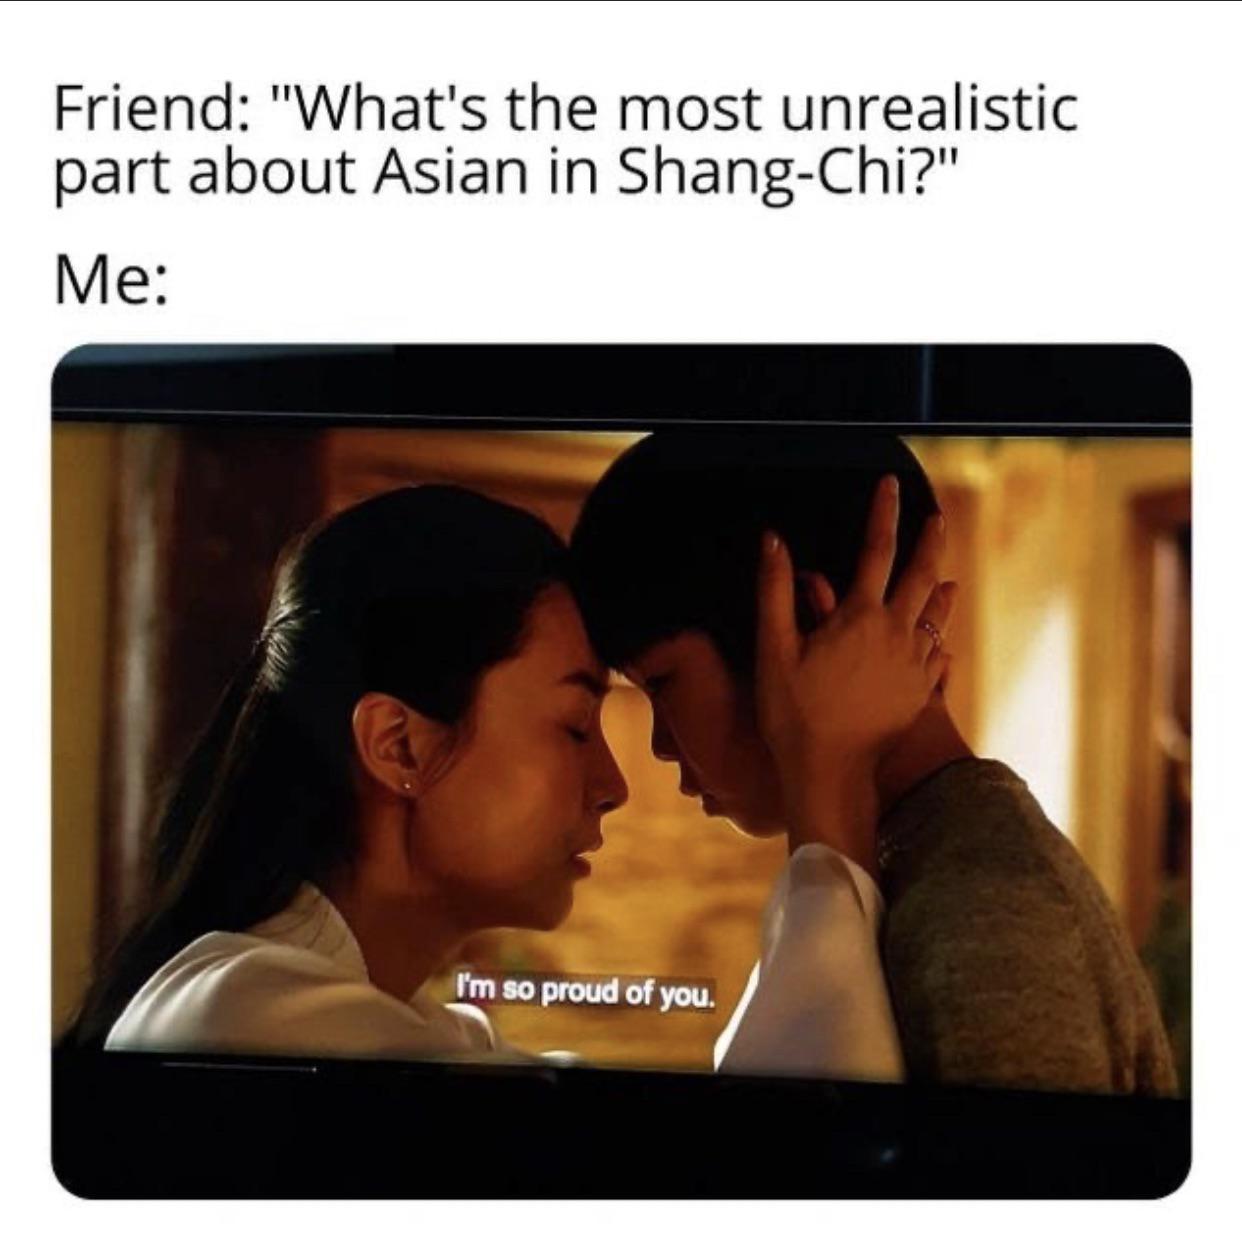 funny memes - dank memes - most unrealistic part of shang chi - Friend "What's the most unrealistic part about Asian in ShangChi?" Me I'm so proud of you.